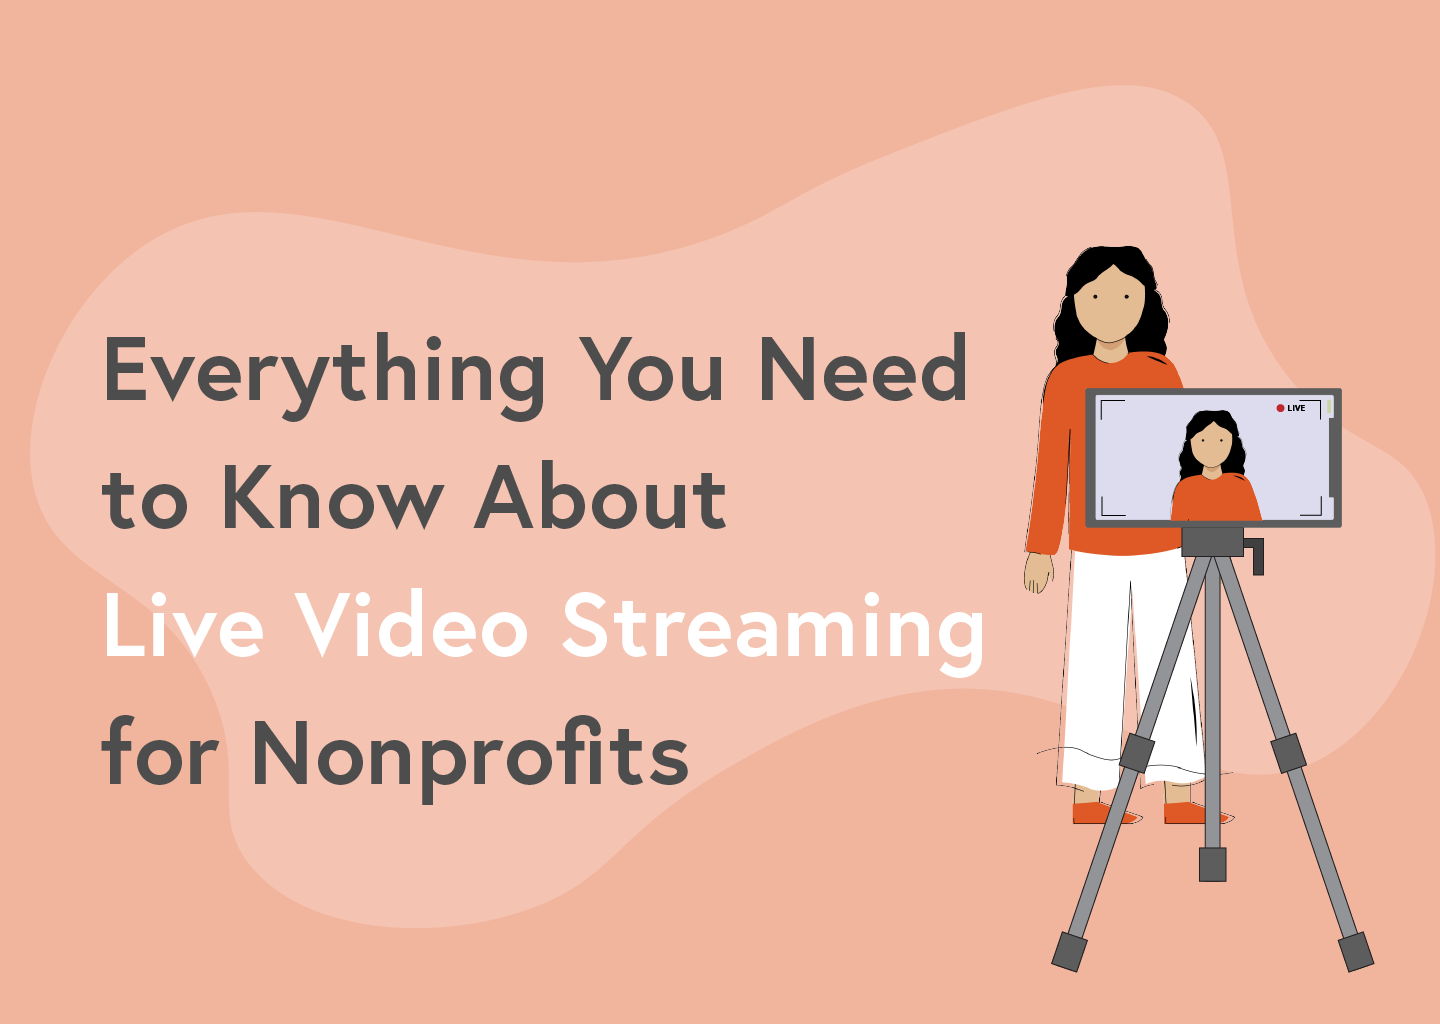 Everything You Need to Know About Live Video Streaming for Nonprofits